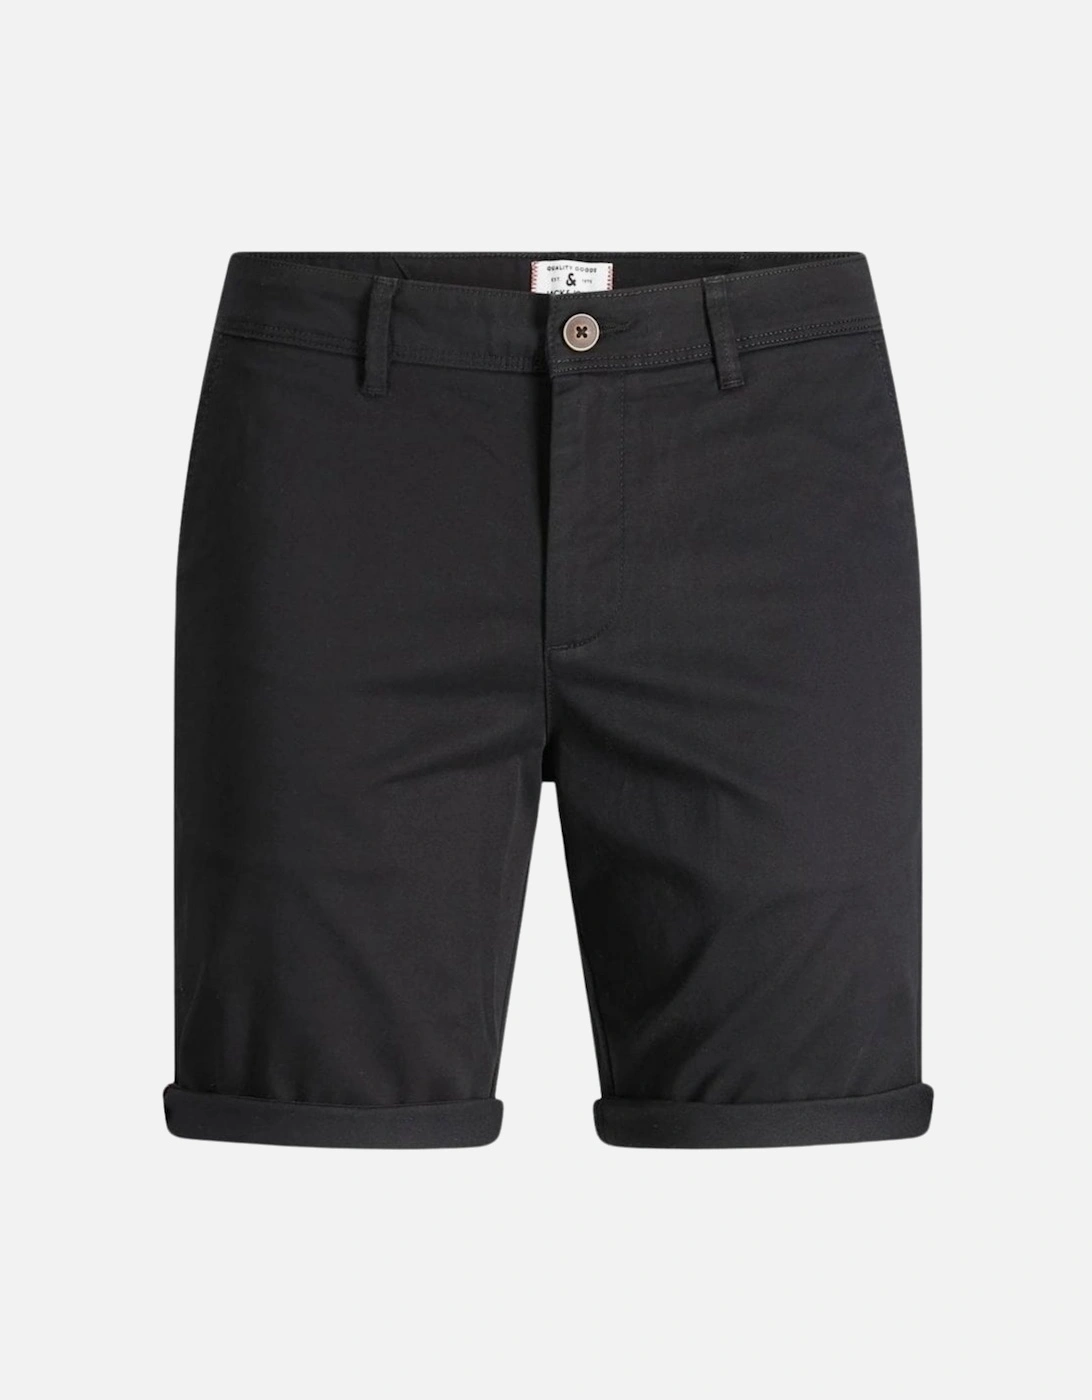 Bowie Chino Shorts - Black, 9 of 8